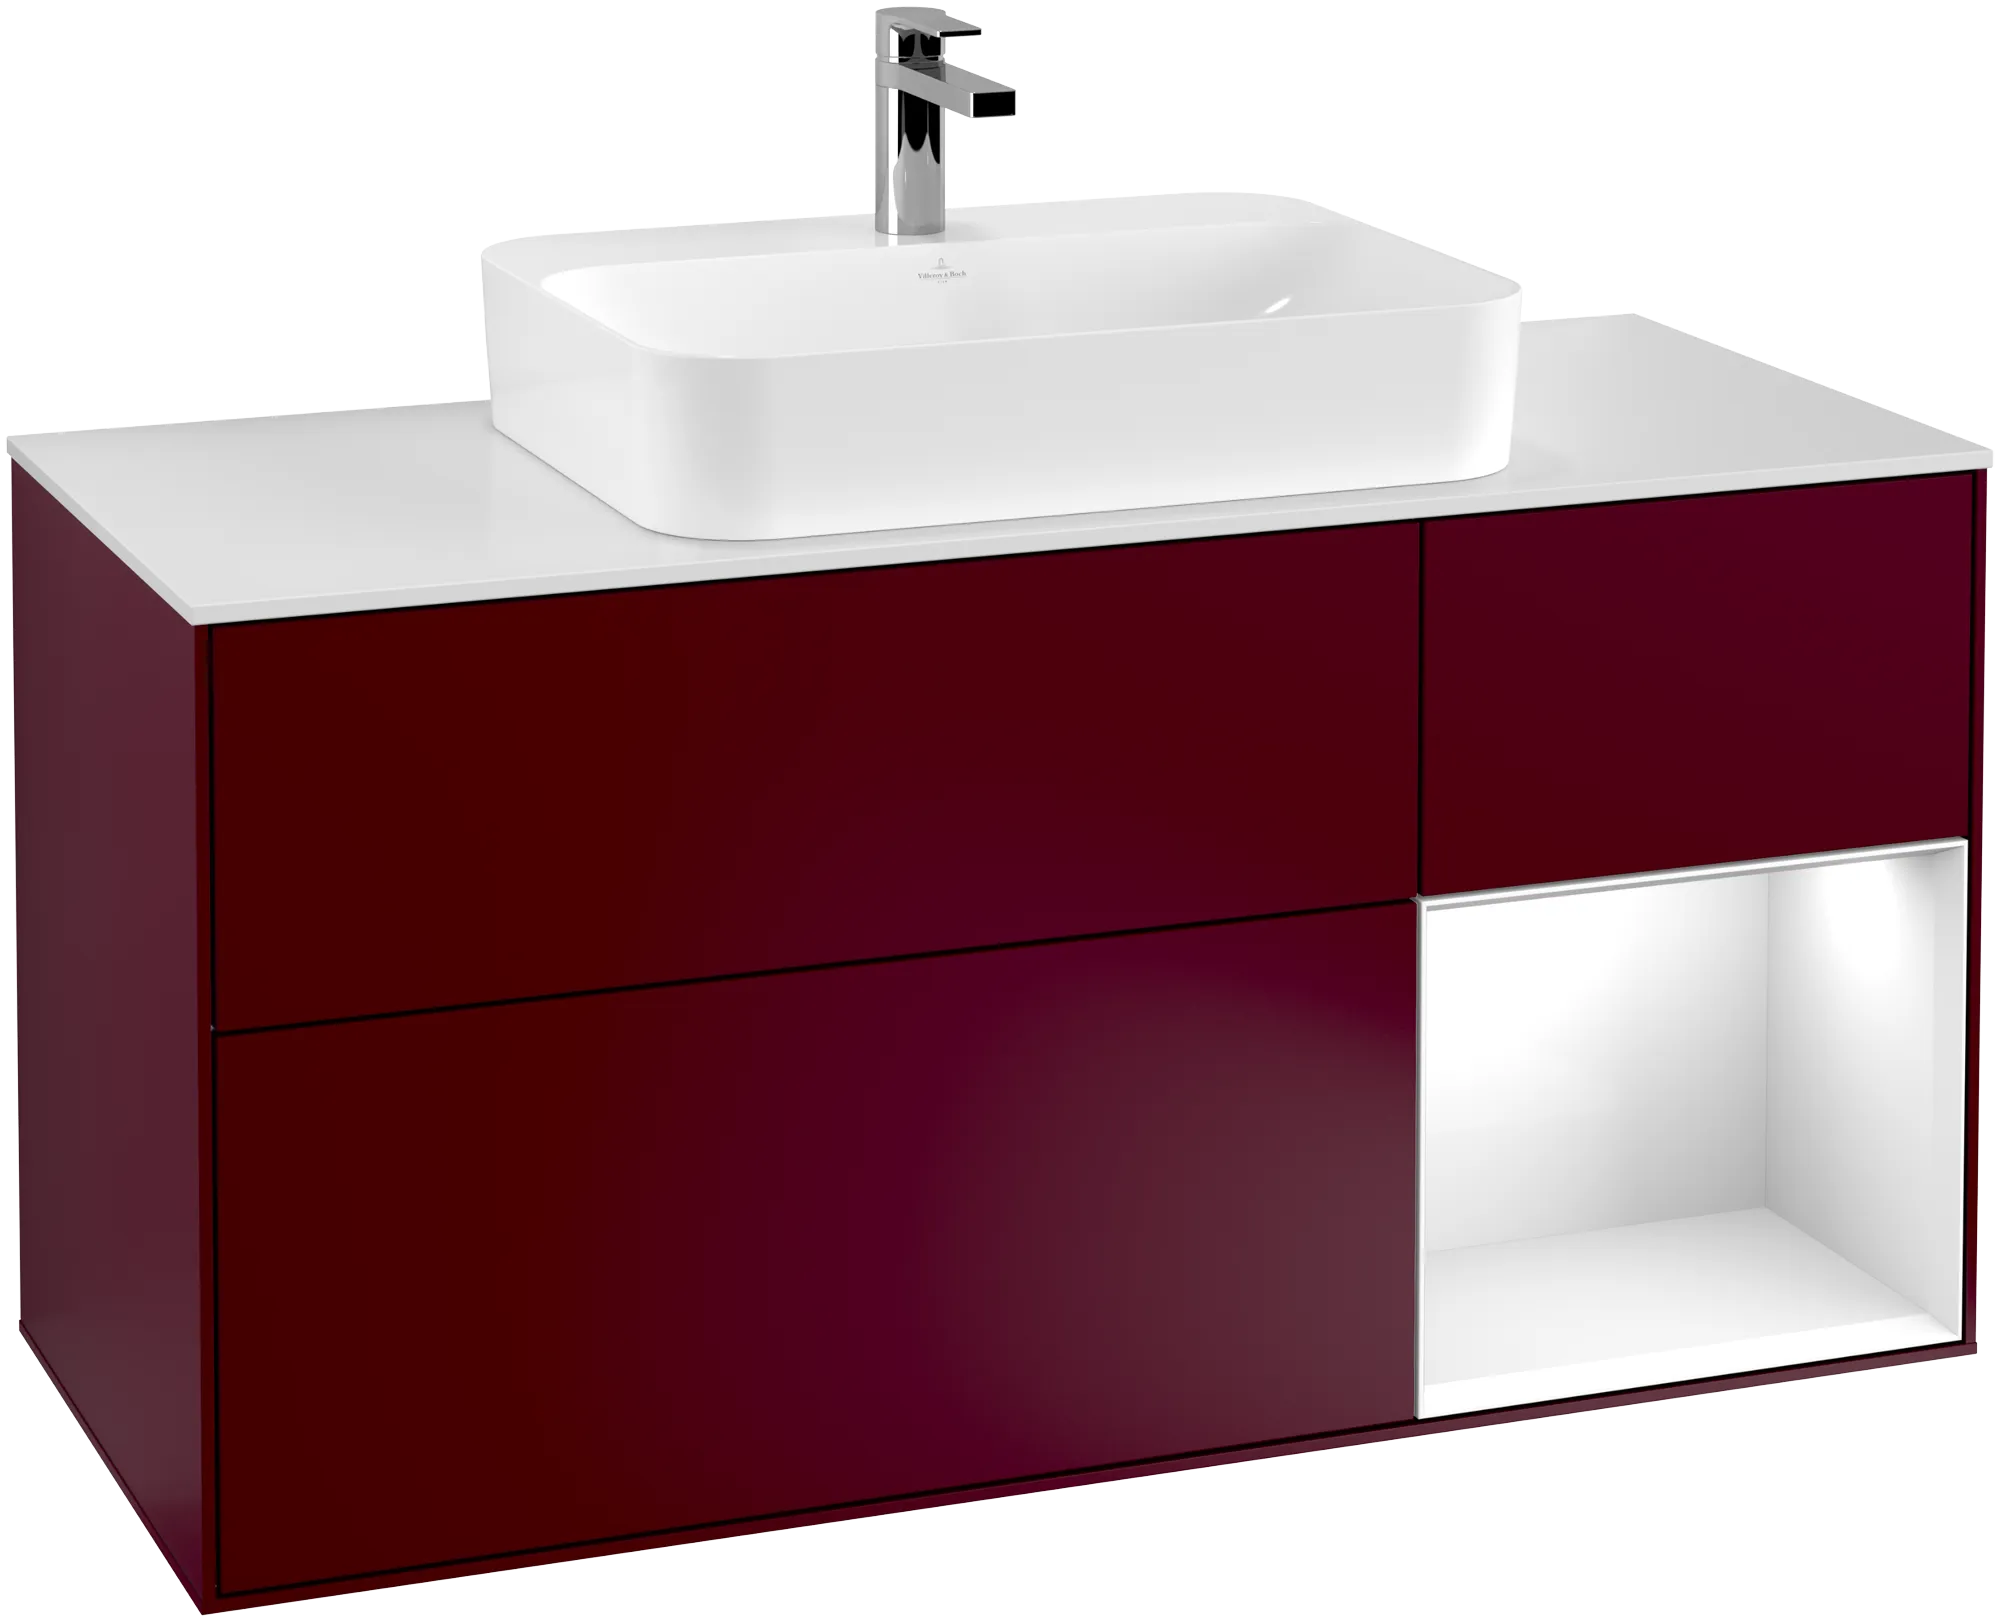 VILLEROY BOCH Finion Vanity unit, with lighting, 3 pull-out compartments, 1200 x 603 x 501 mm, Peony Matt Lacquer / Glossy White Lacquer / Glass White Matt #G421GFHB resmi